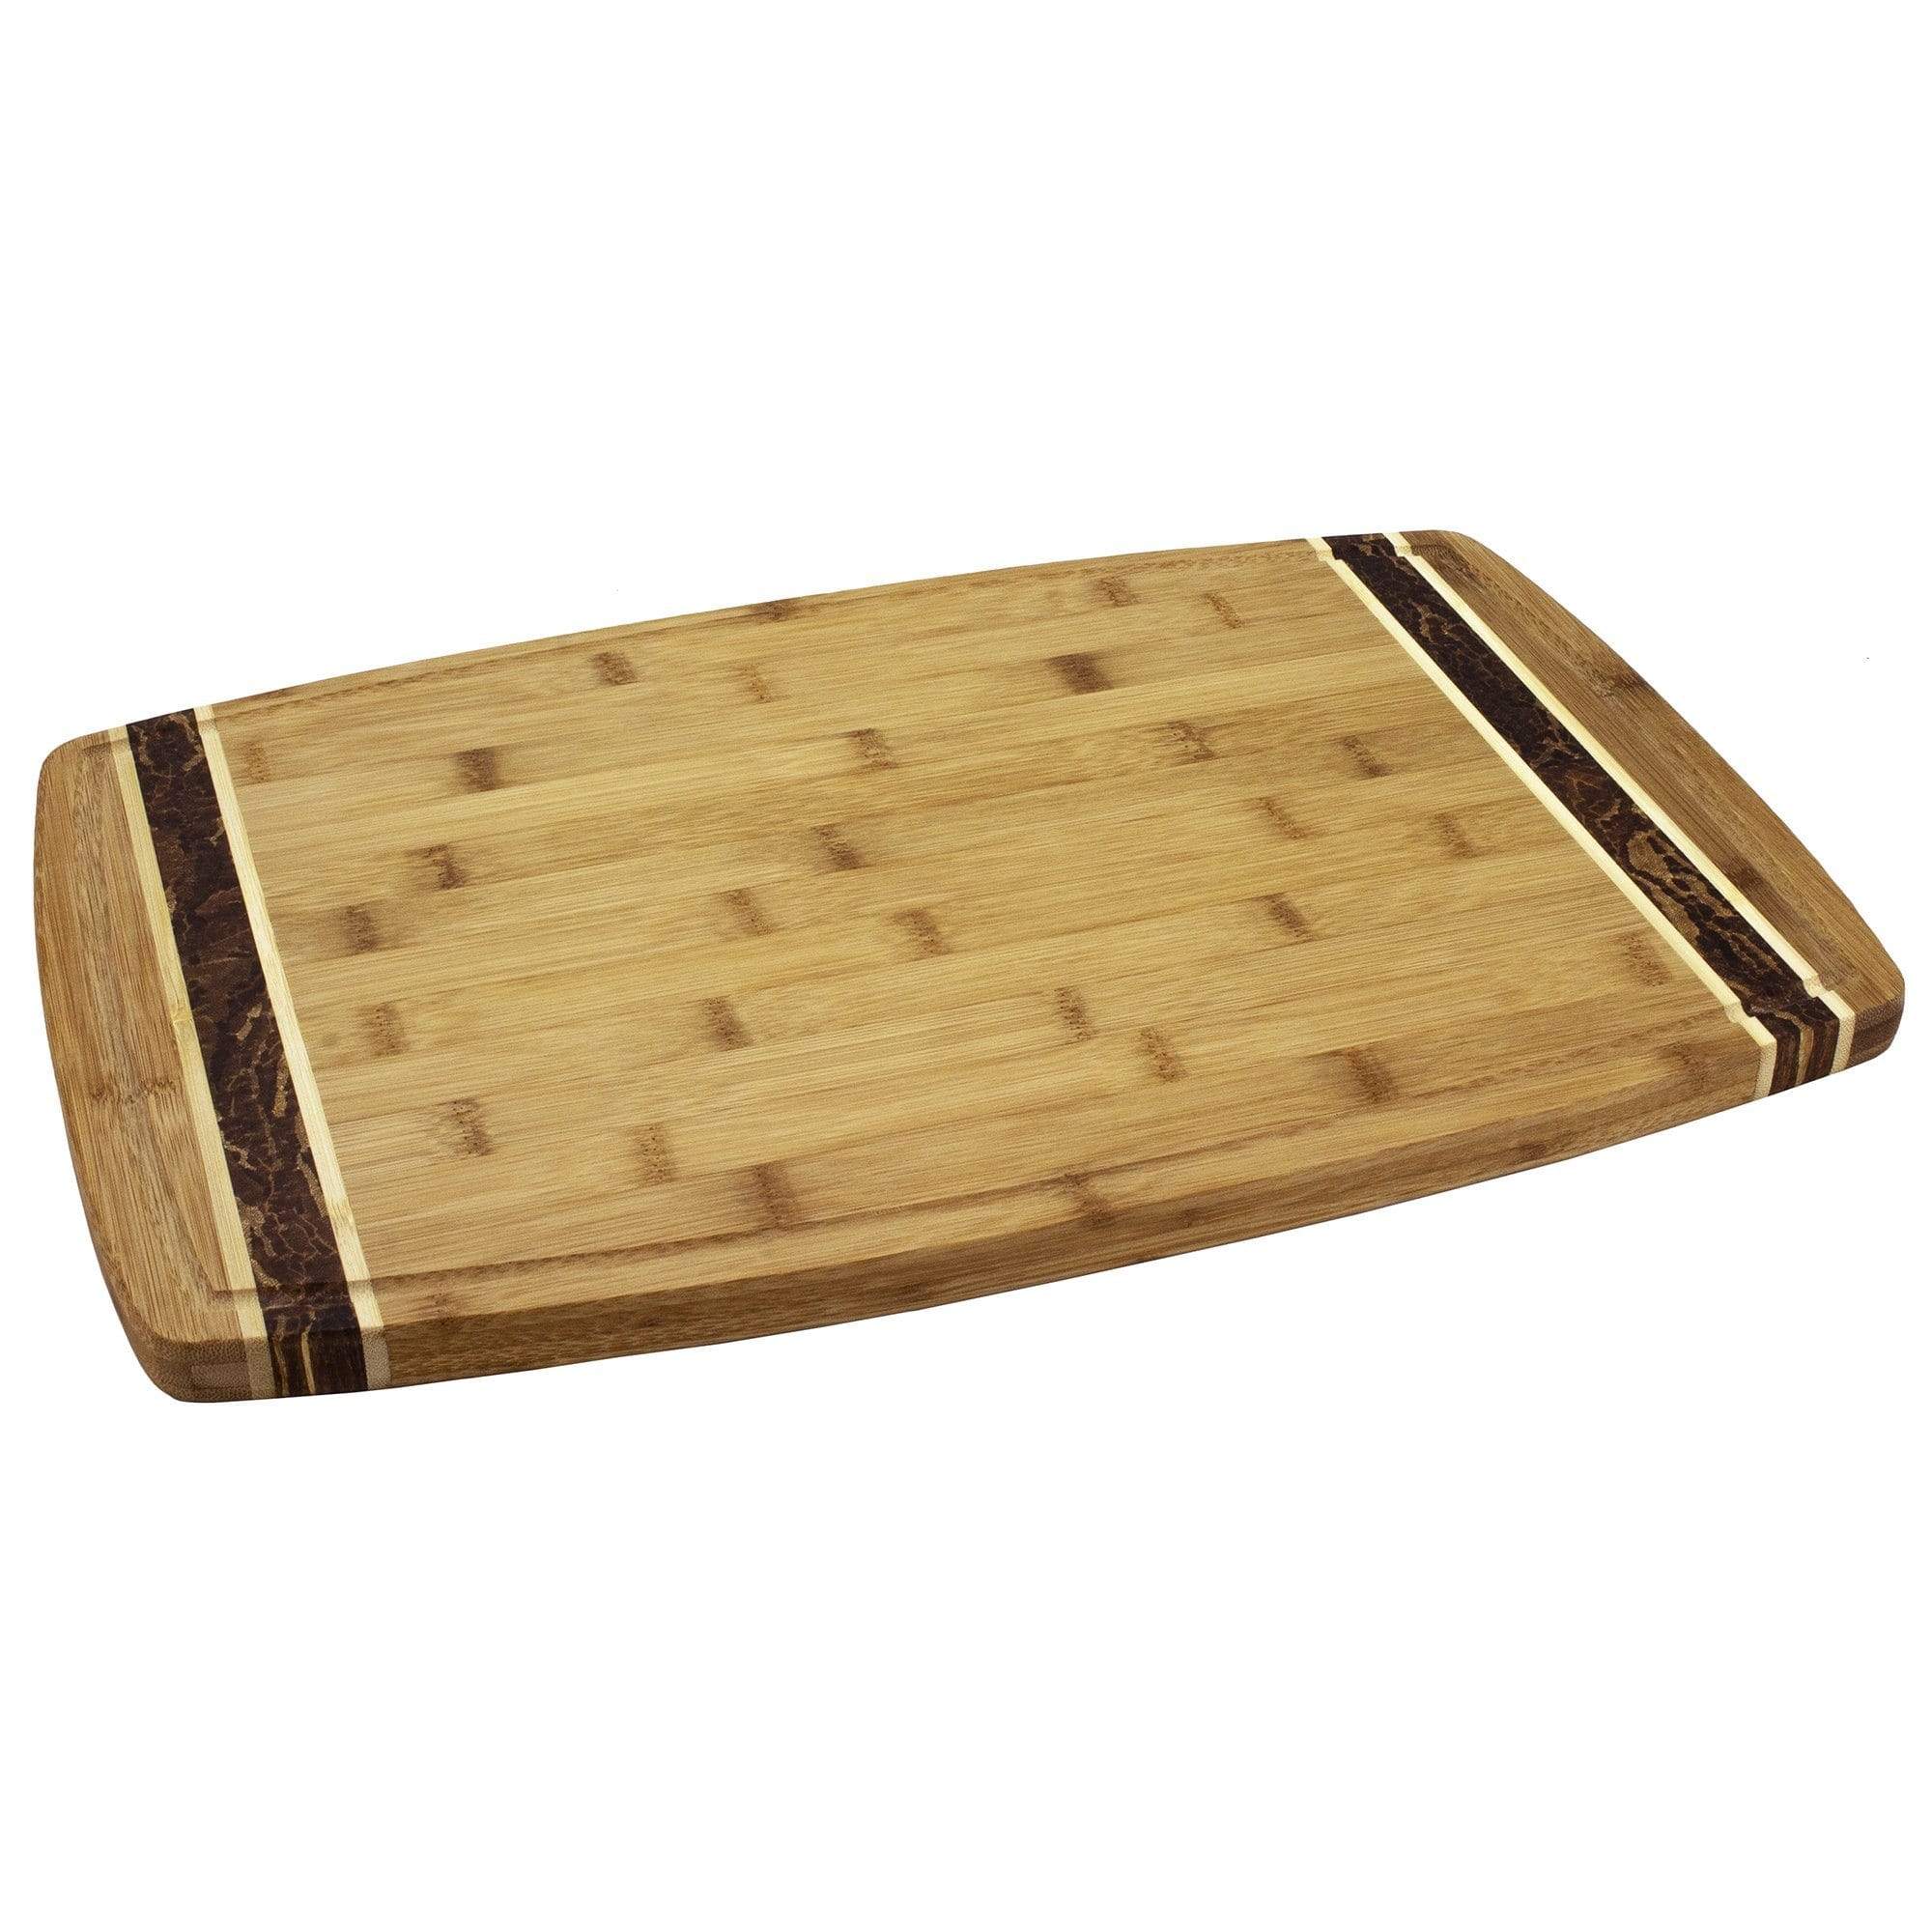 https://totallybamboo.com/cdn/shop/products/18-marbled-bamboo-serving-and-cutting-board-totally-bamboo-730897.jpg?v=1628142536